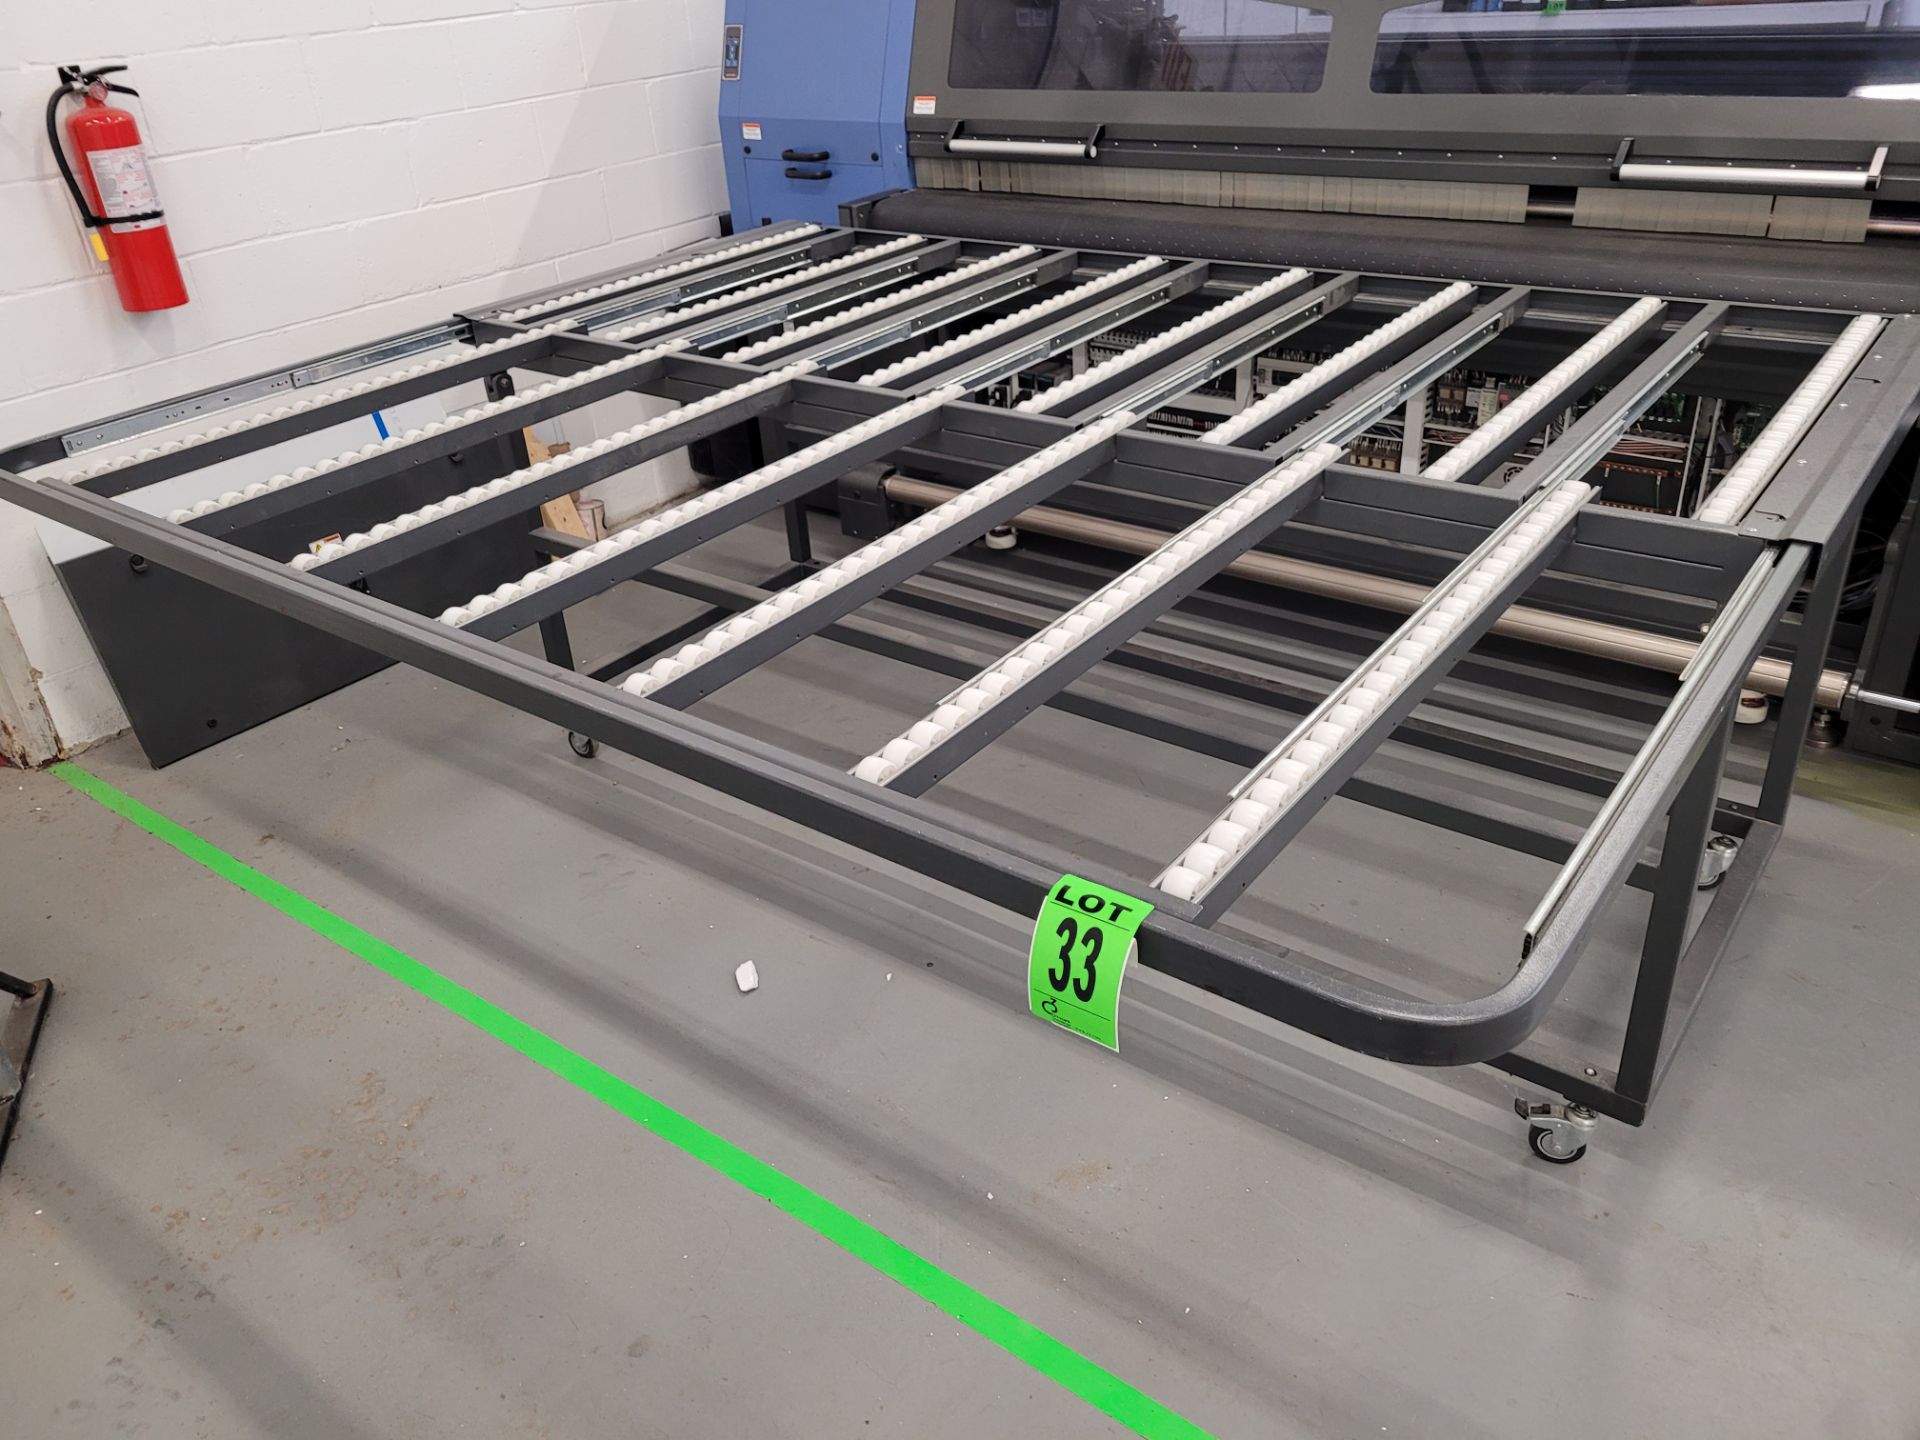 Extendable entry/exit roller conveyor on casters, 92" x 45" x 38" (up to 75")